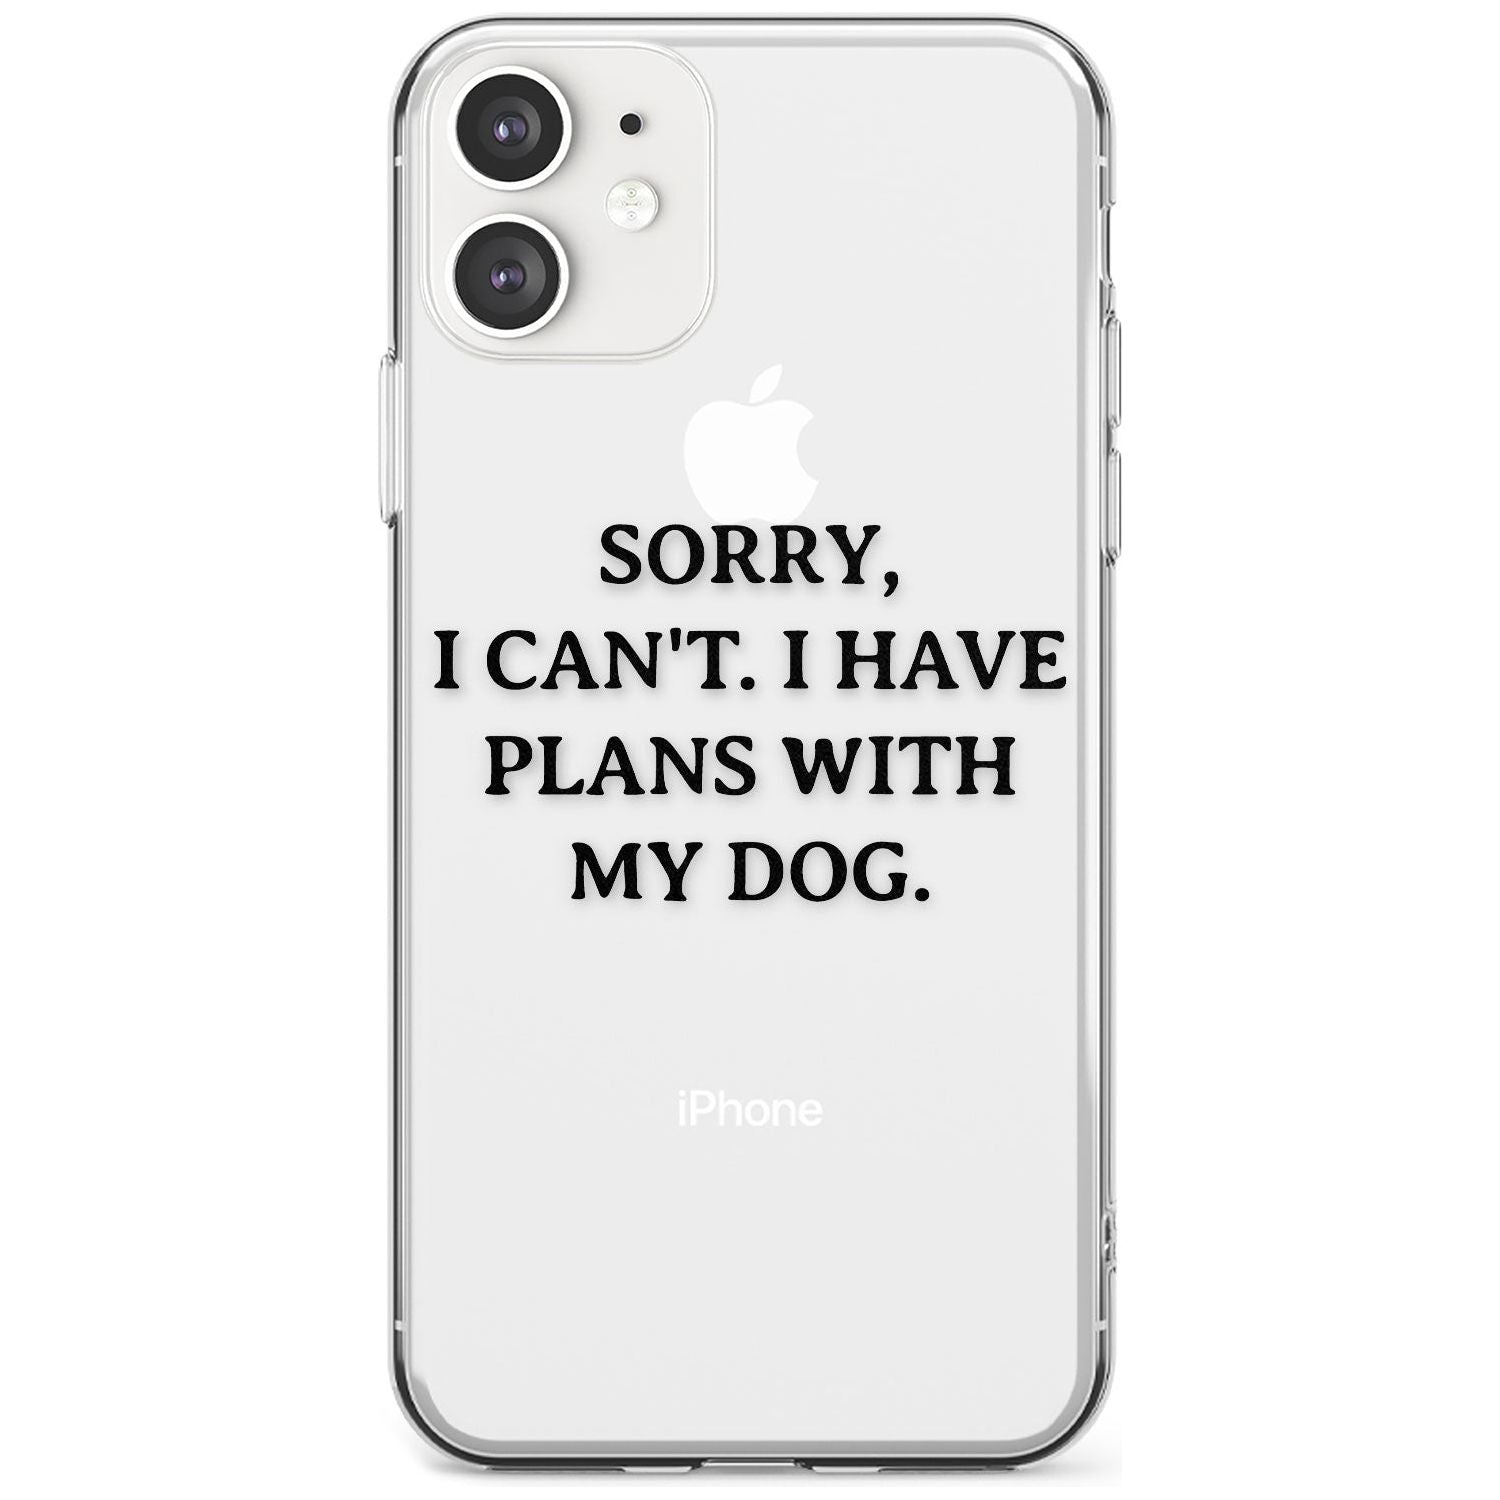 Plans with Dog Slim TPU Phone Case for iPhone 11